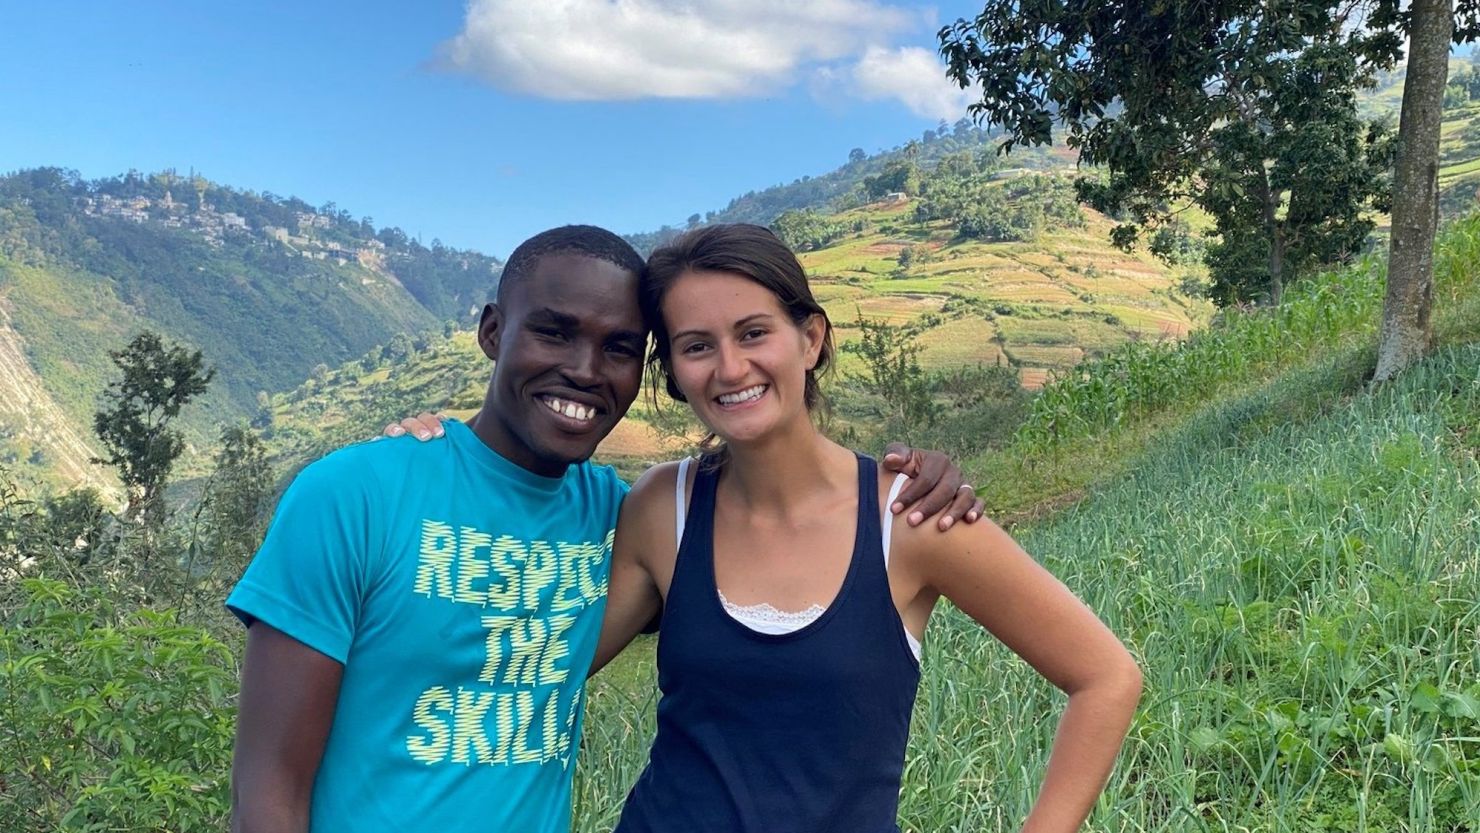 Alix Dorsainvil poses with her husband, El Roi Haiti Director Sandro Dorsainvil. She and her daughter were released this month after a 13-day kidnapping, the organization said.